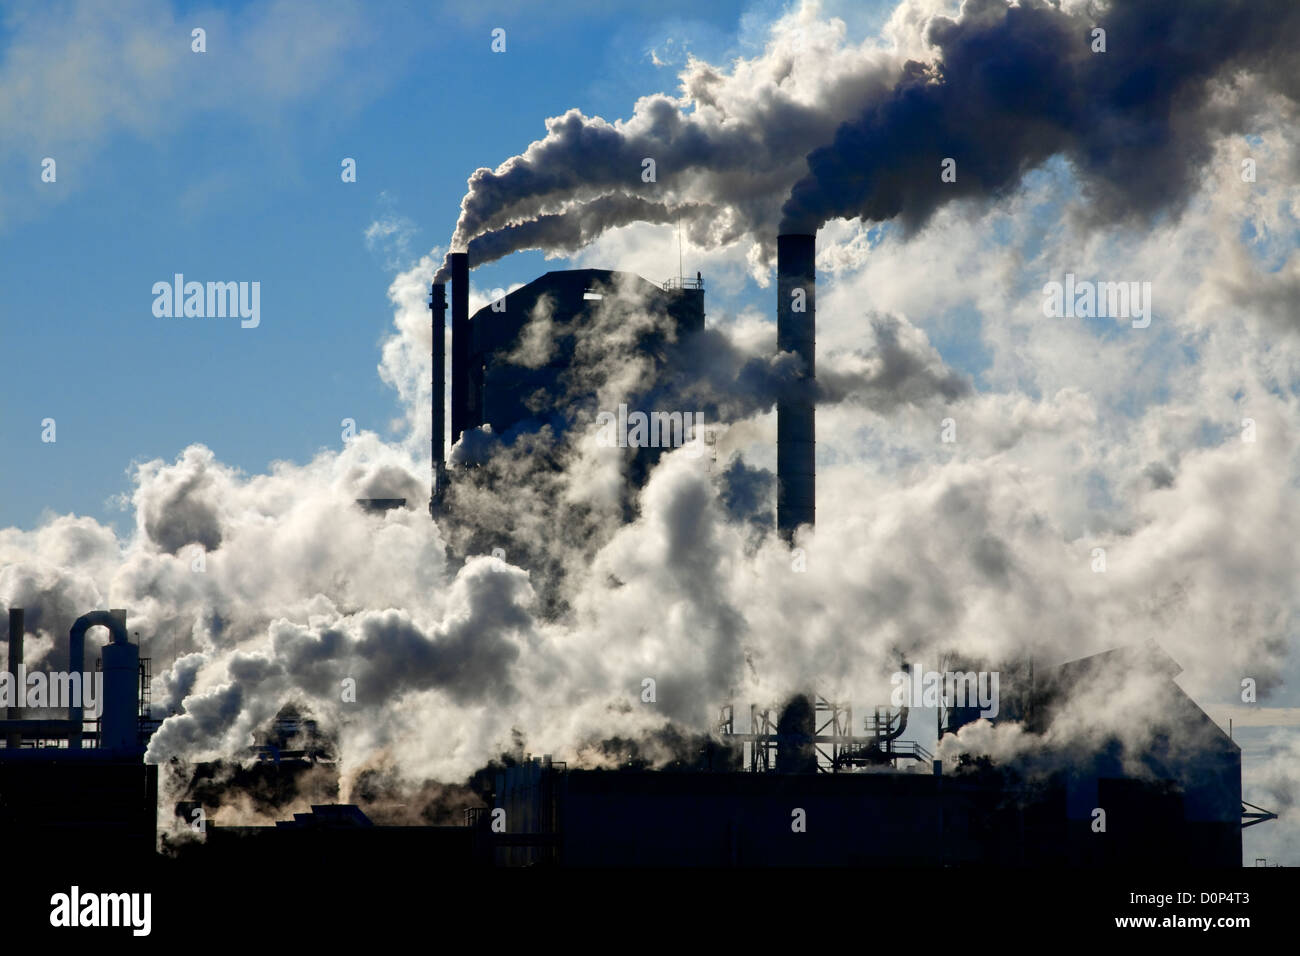 GA00128-00...GEORGIA - Smoke and steam issuing from multiple smokestacks at a fibers factory in the town of Jesup. Stock Photo